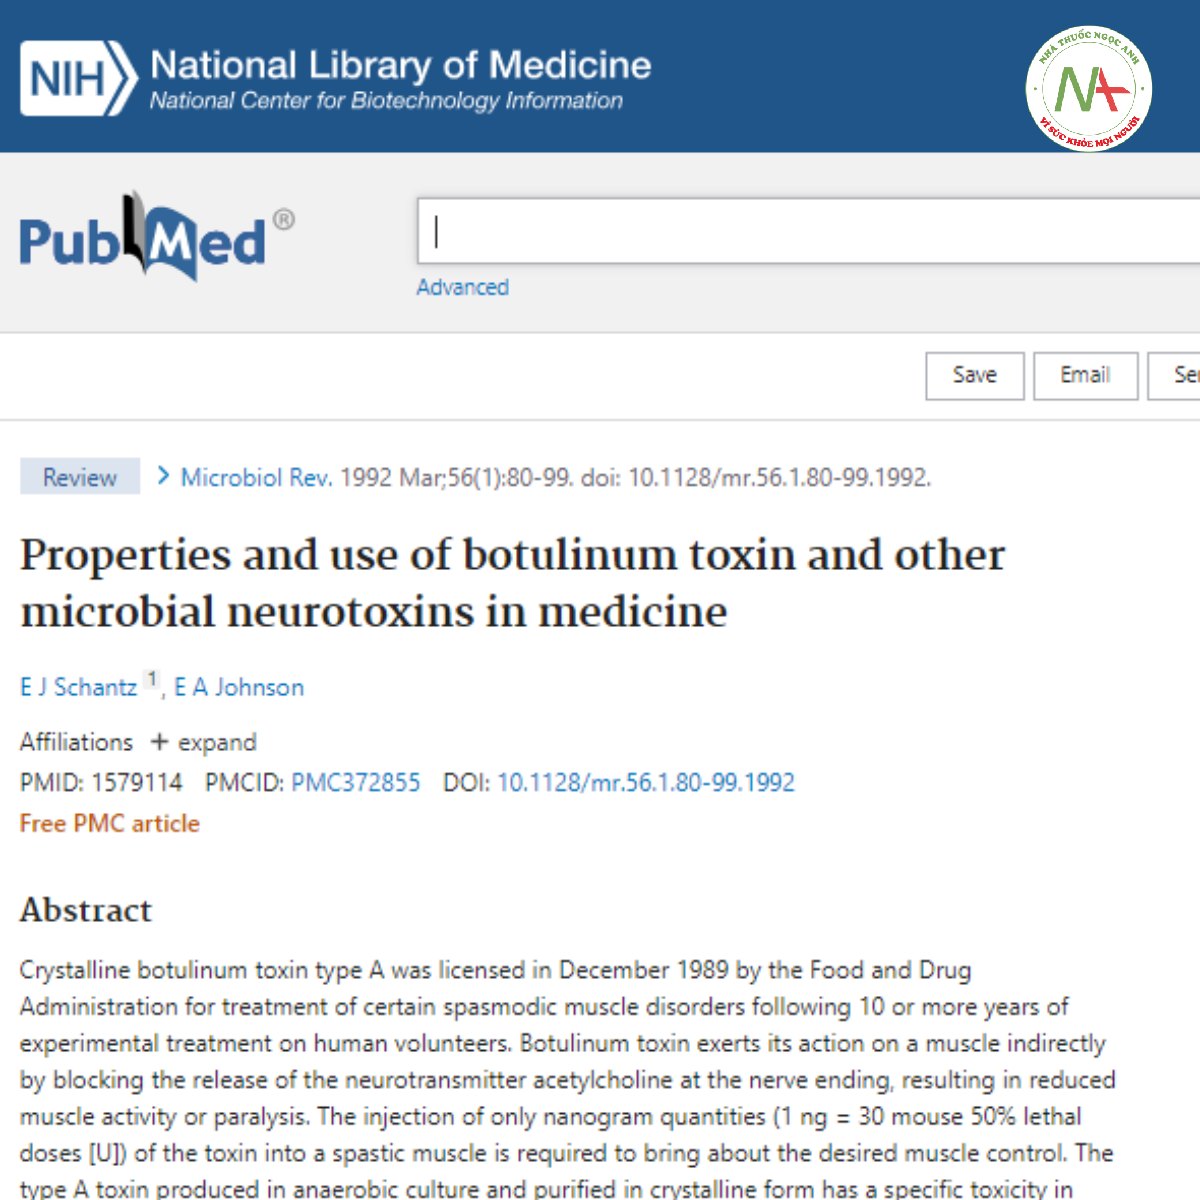 Properties and use of botulinum toxin and other microbial neurotoxins in medicine